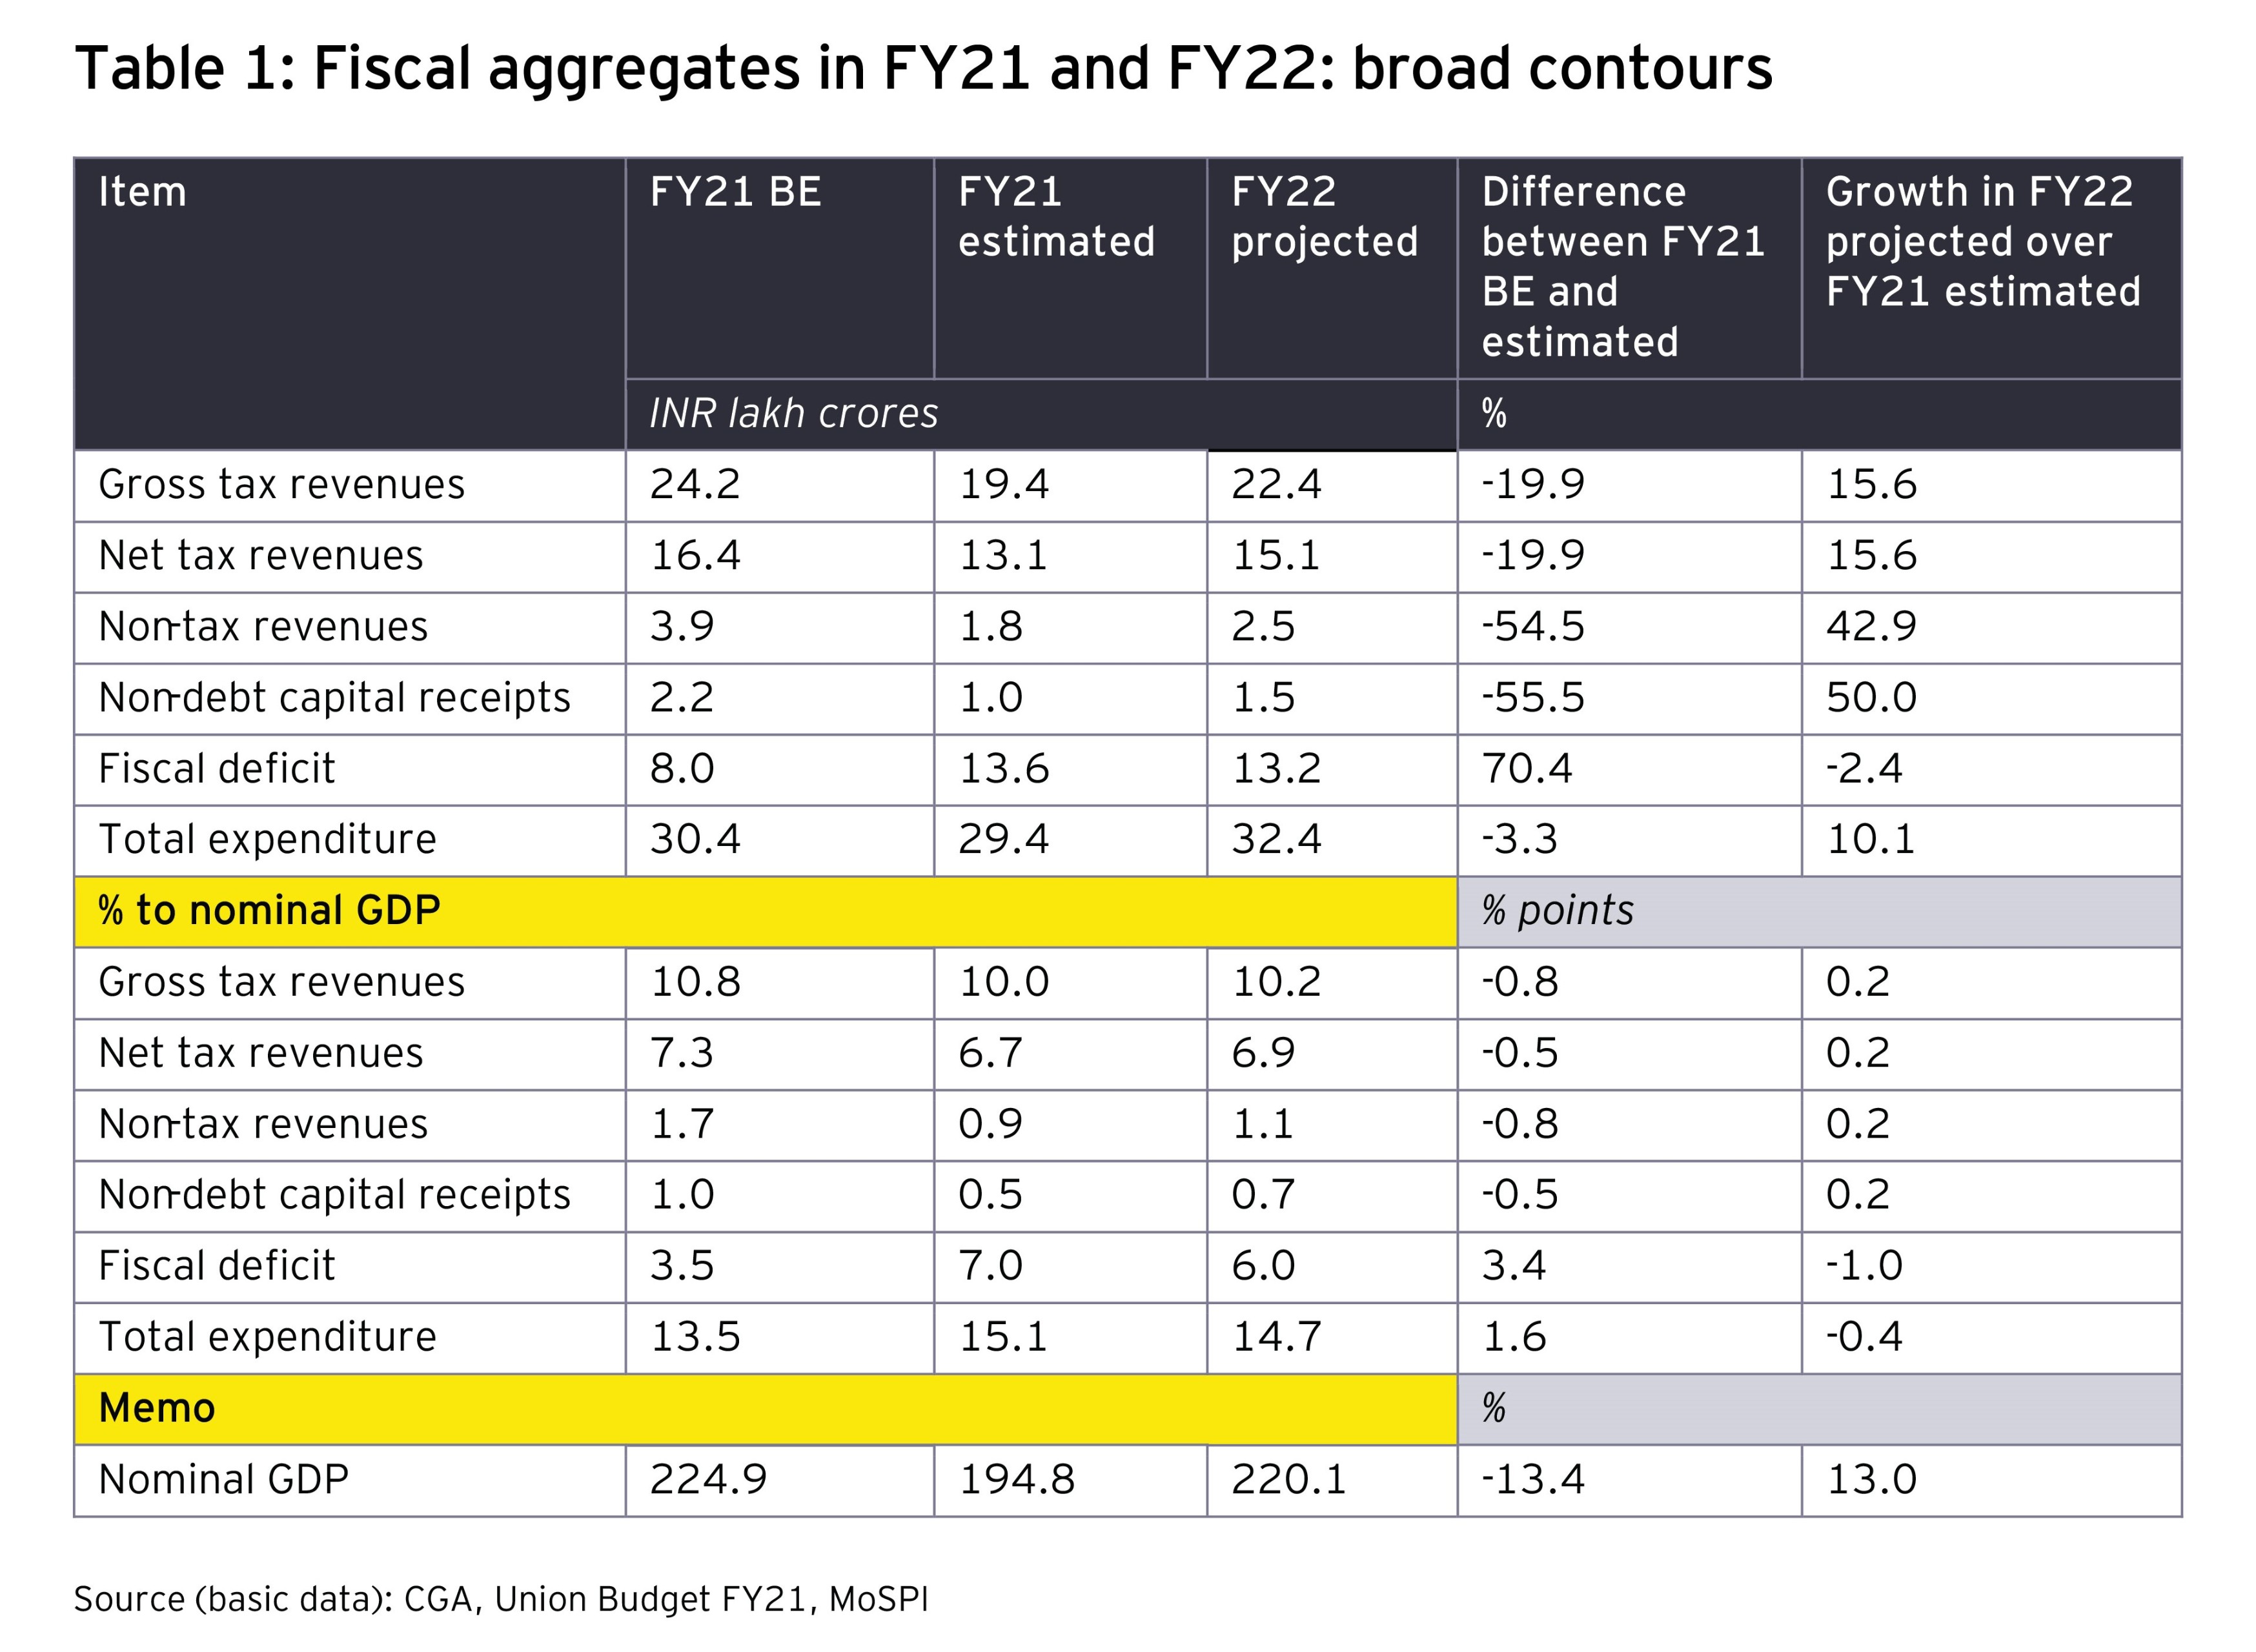 Fiscal aggregates in FY21 and FY22: Broad contours